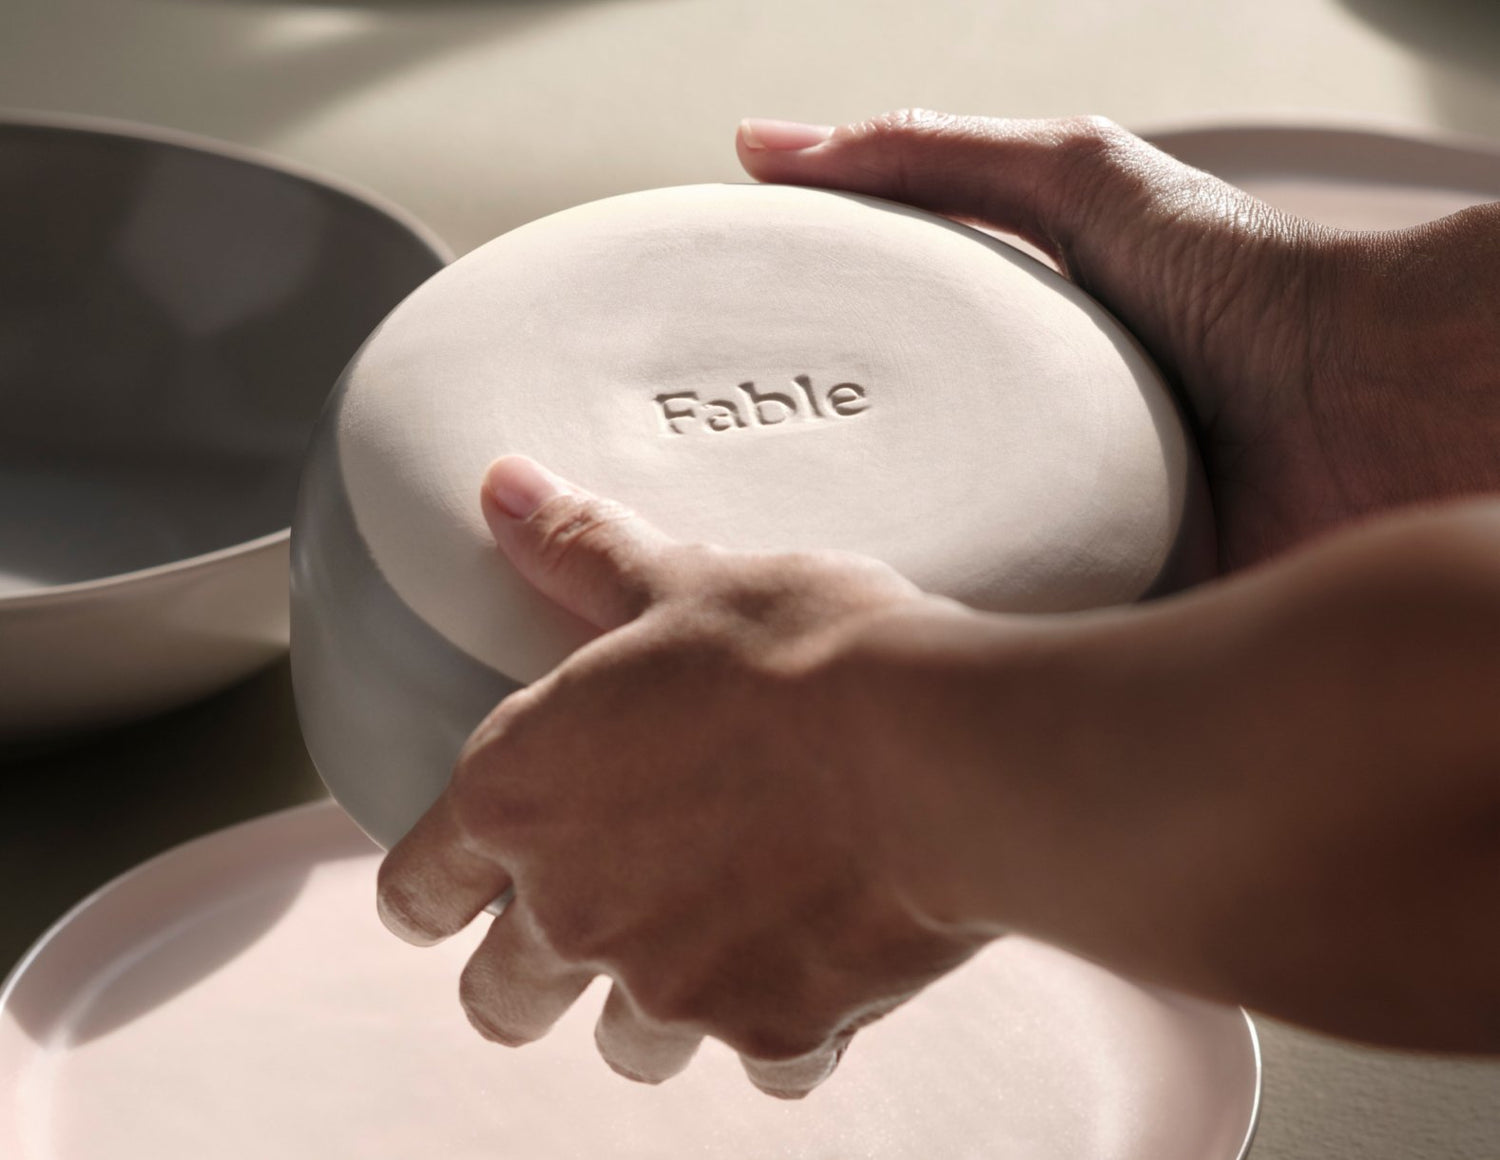 Someone holds a bowl upside down, showing a stamp that says "Fable" on the bottom.